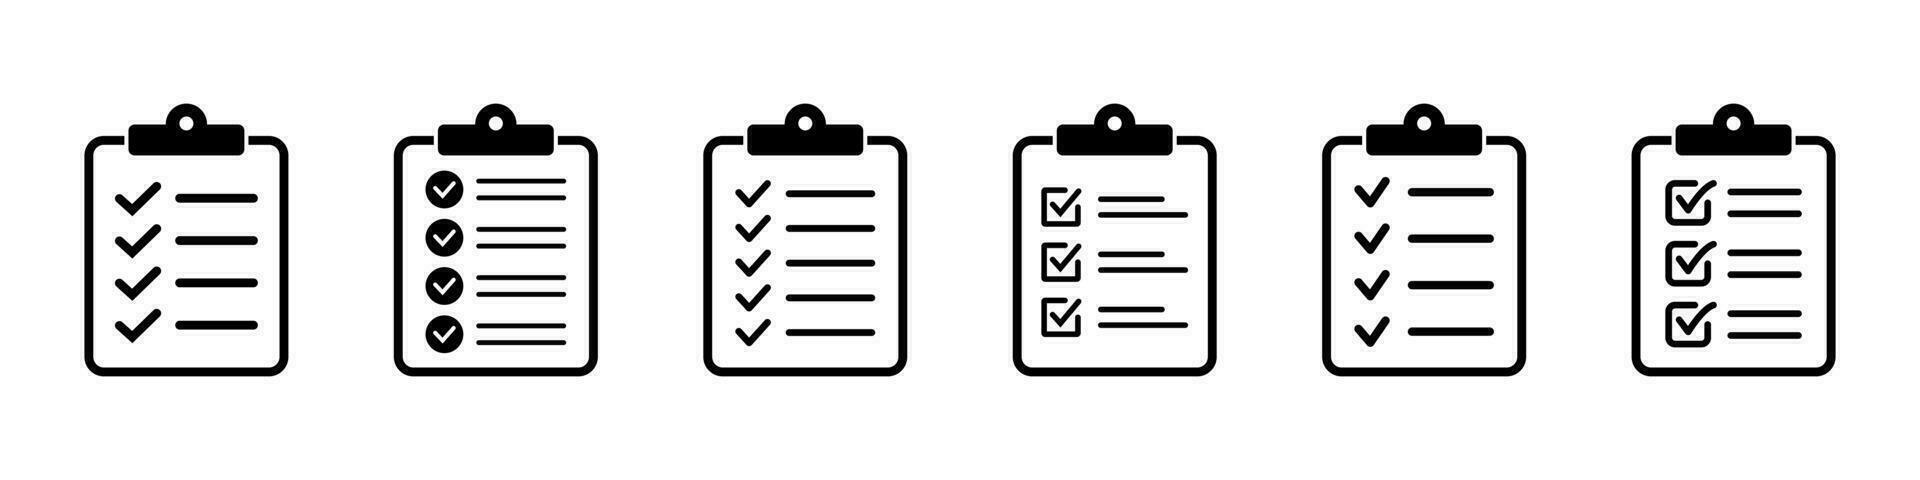 Clipboard and checklist icon. Project management, questionnaire line icon. To do list vector icon for web site and app design.